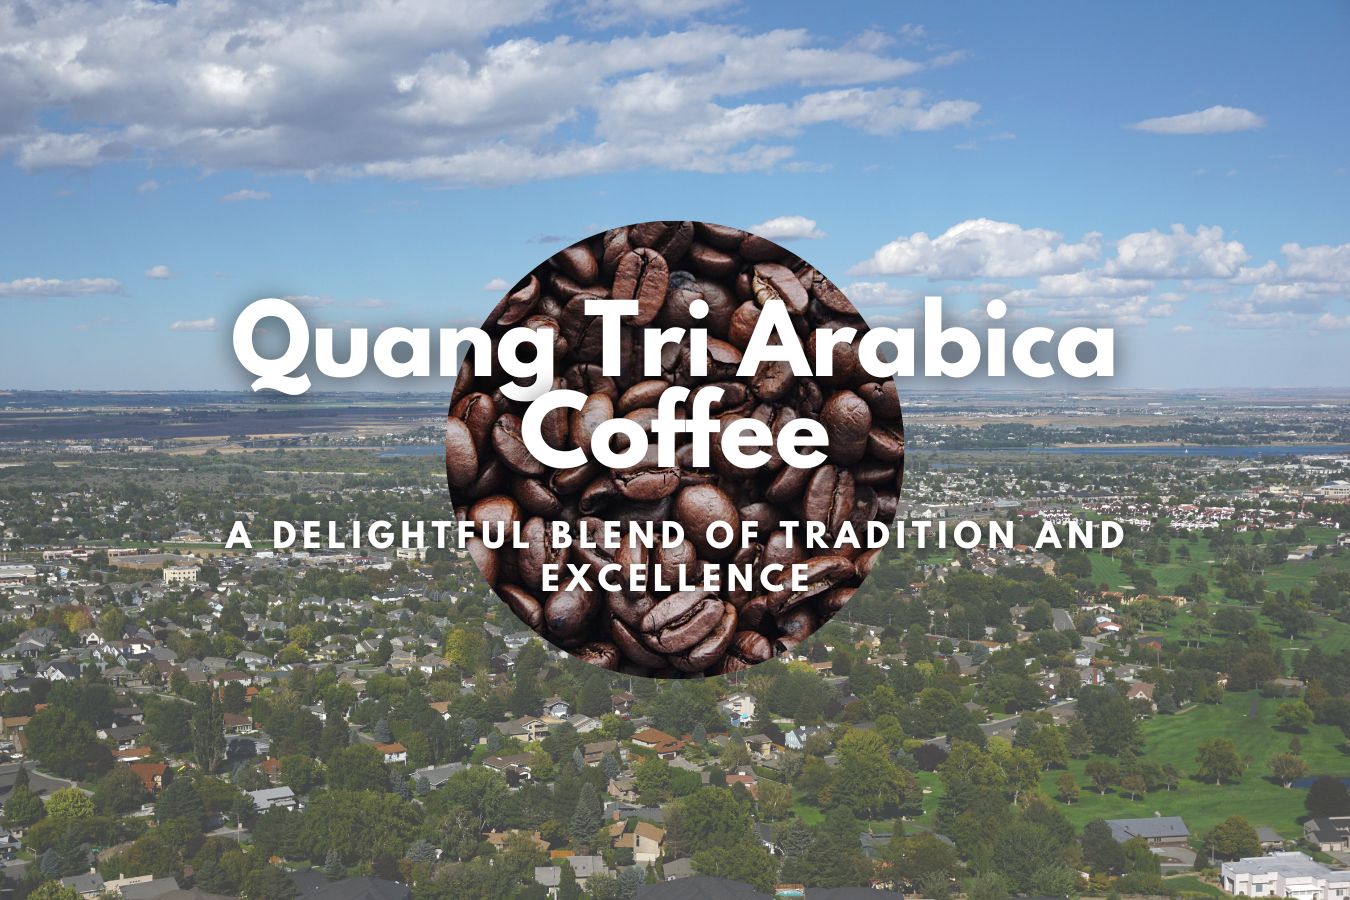 Quang Tri Arabica Coffee: A Delightful Blend of Tradition and Excellence